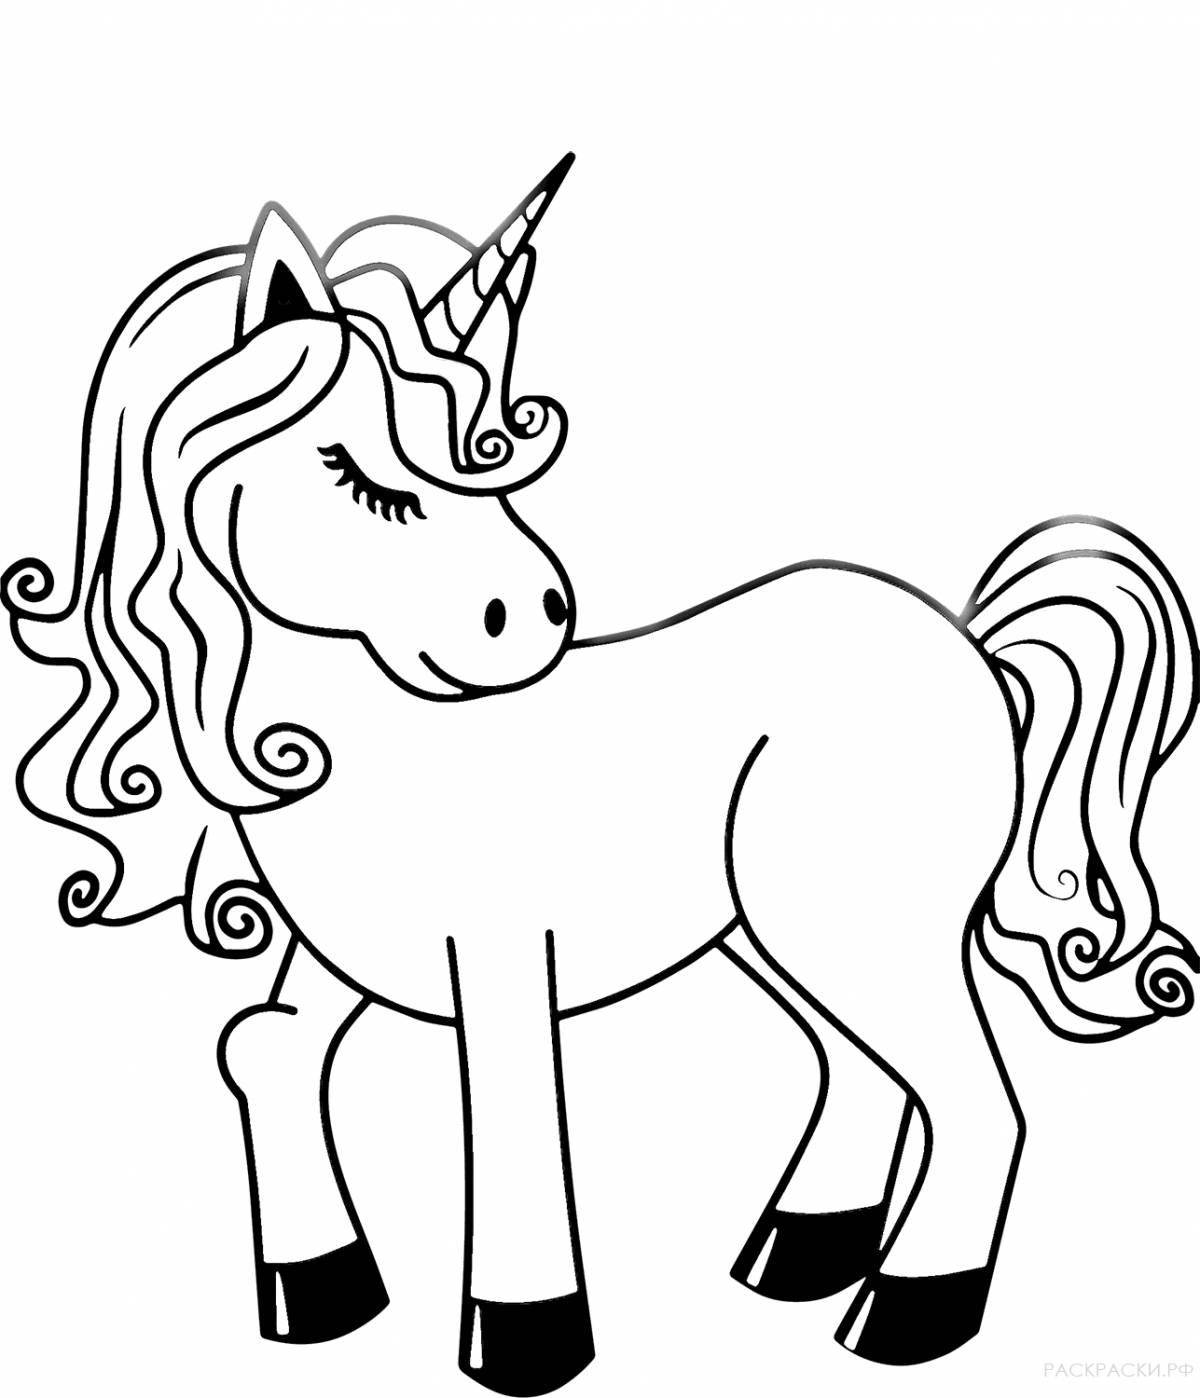 Fabulous baby unicorn coloring pages